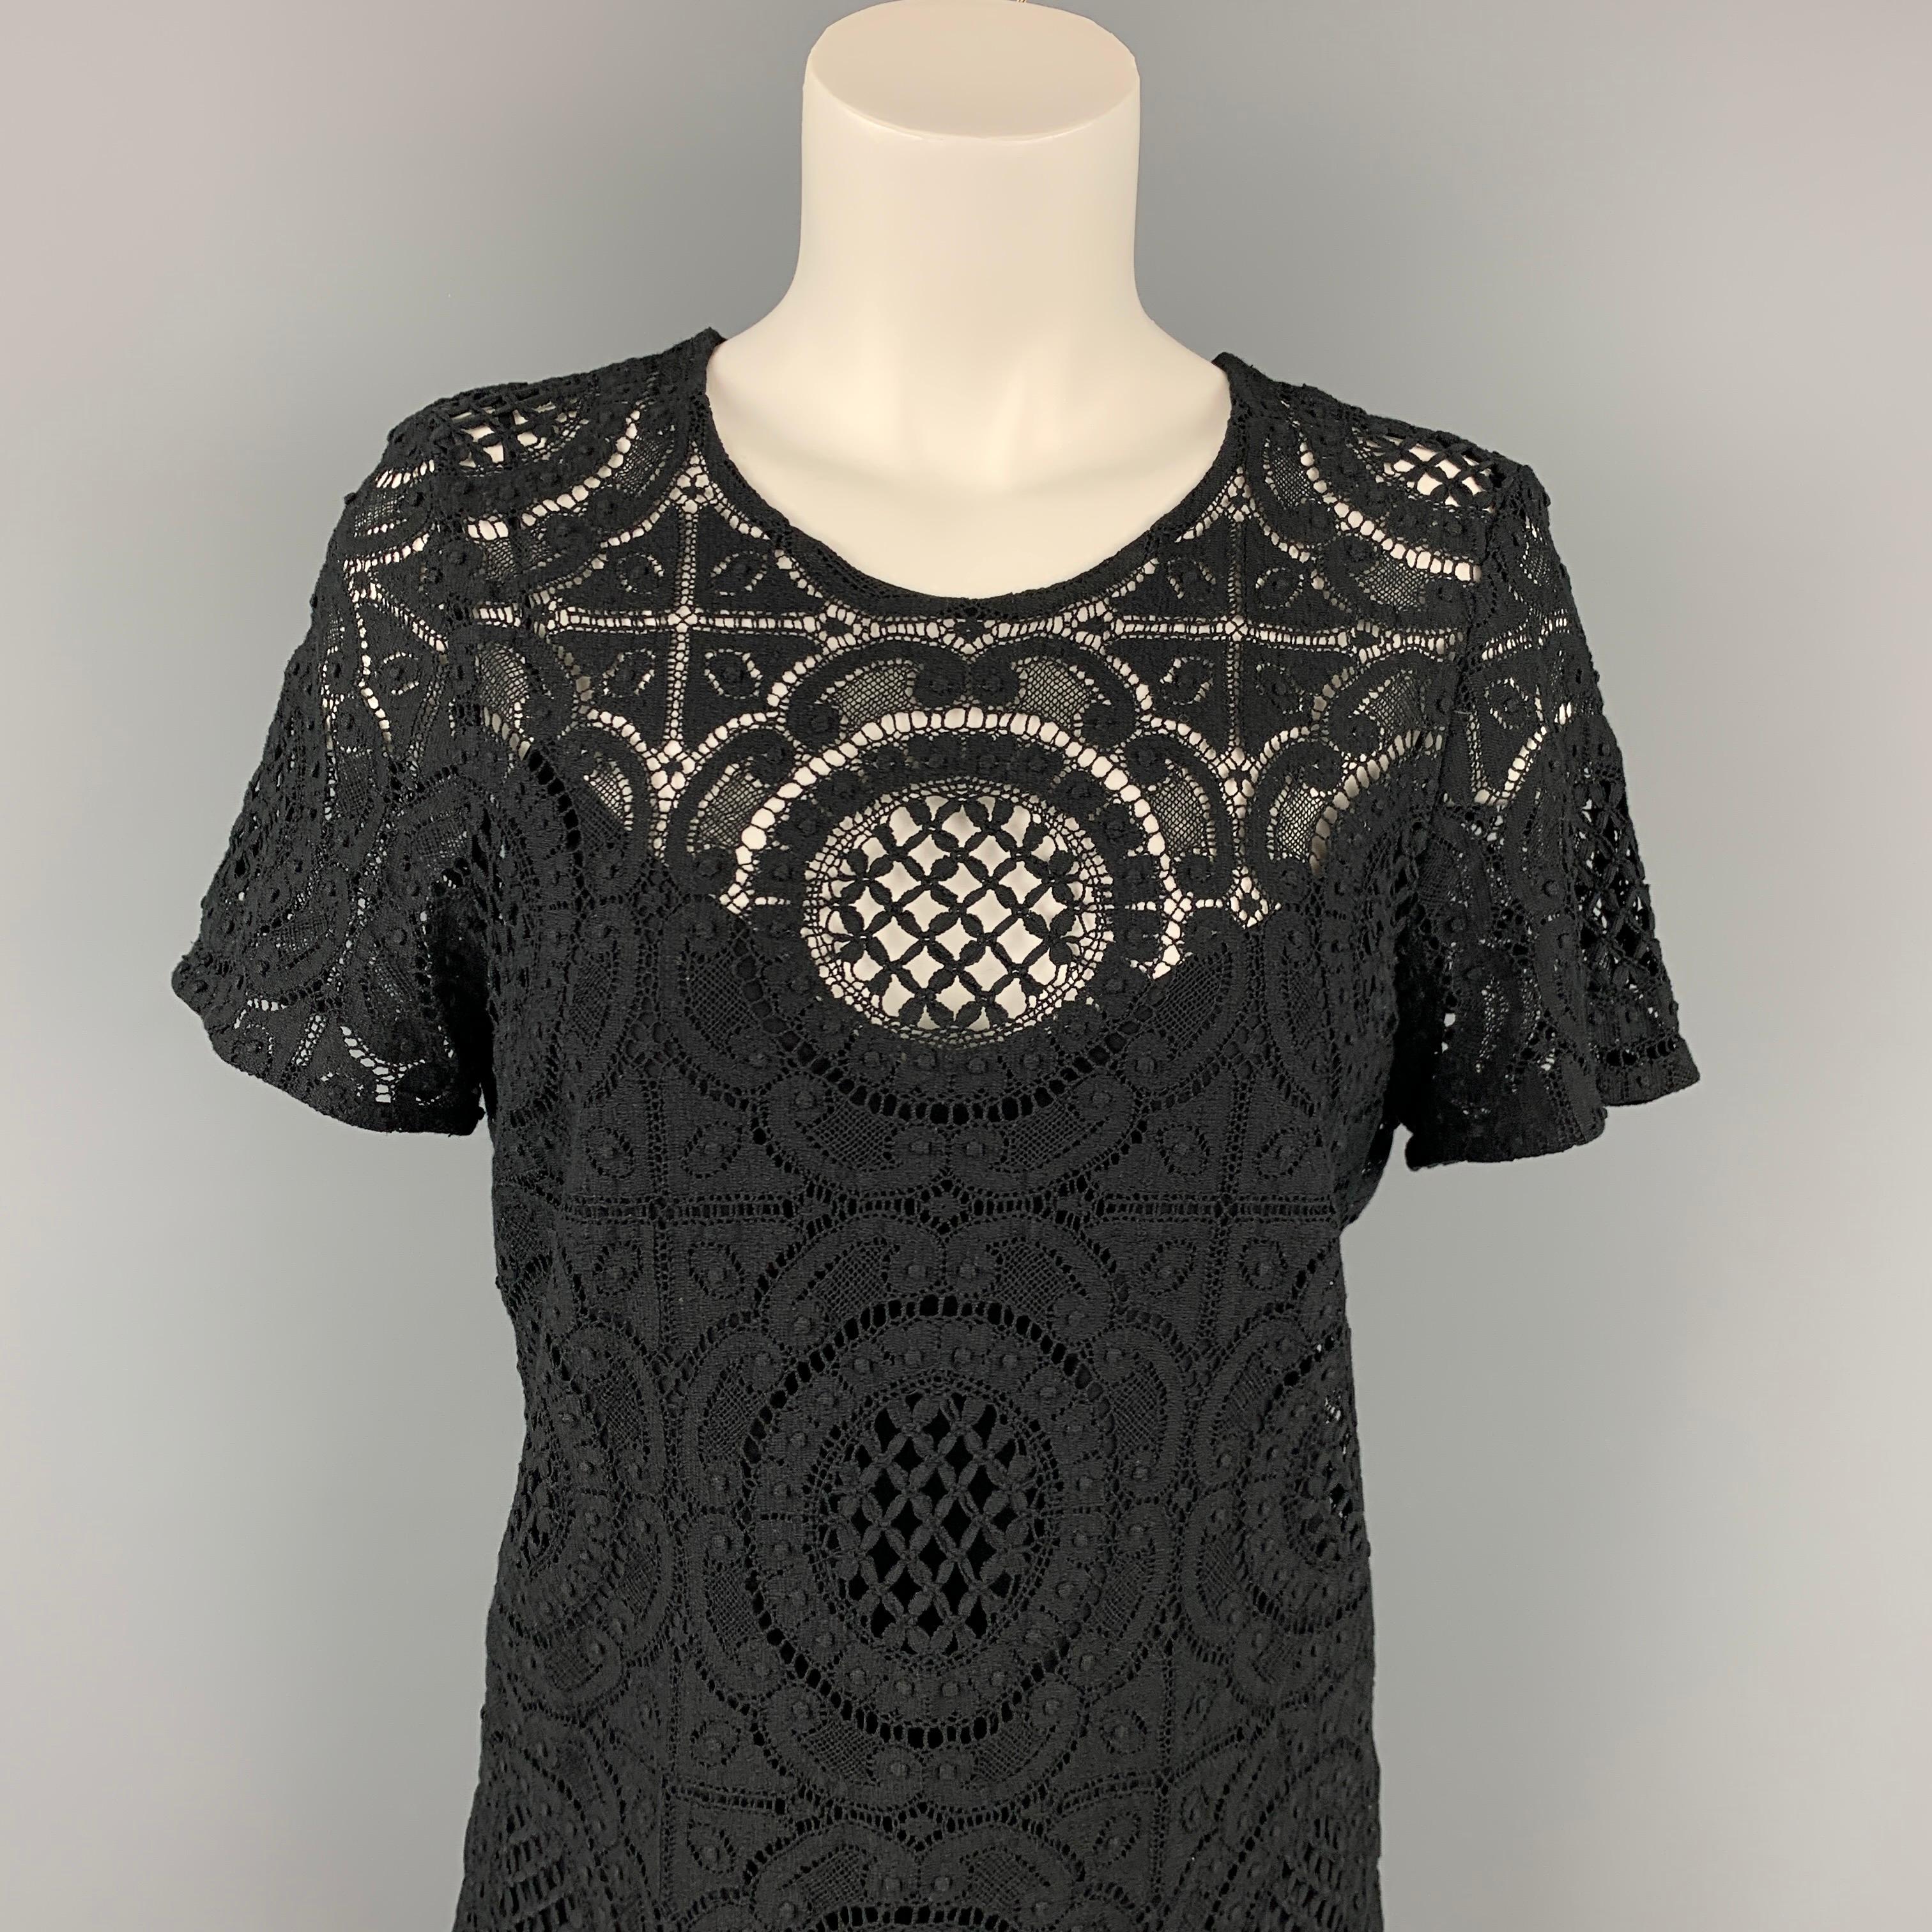 BURBERRY PRORSUM dress top comes in a black cotton / nylon with a camisole featuring a crew-neck and a back button closure. Made in Italy.

Very Good Pre-Owned Condition.
Marked: 46

Measurements:

Shoulder: 15 in. 
Bust: 36 in.
Sleeve: 9